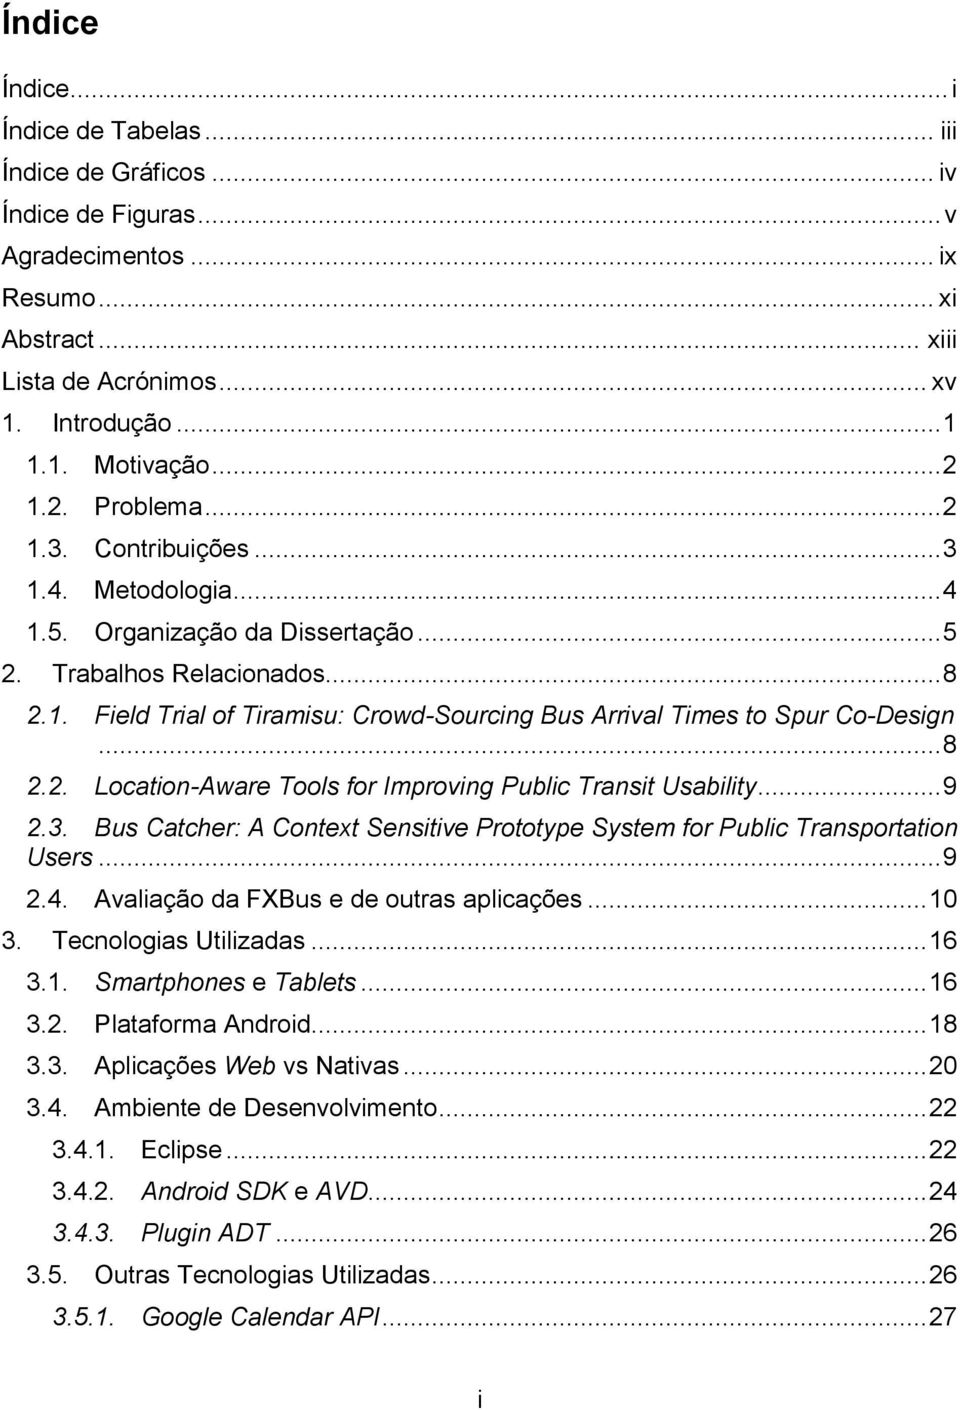 .. 8 2.2. Location-Aware Tools for Improving Public Transit Usability... 9 2.3. Bus Catcher: A Context Sensitive Prototype System for Public Transportation Users... 9 2.4.